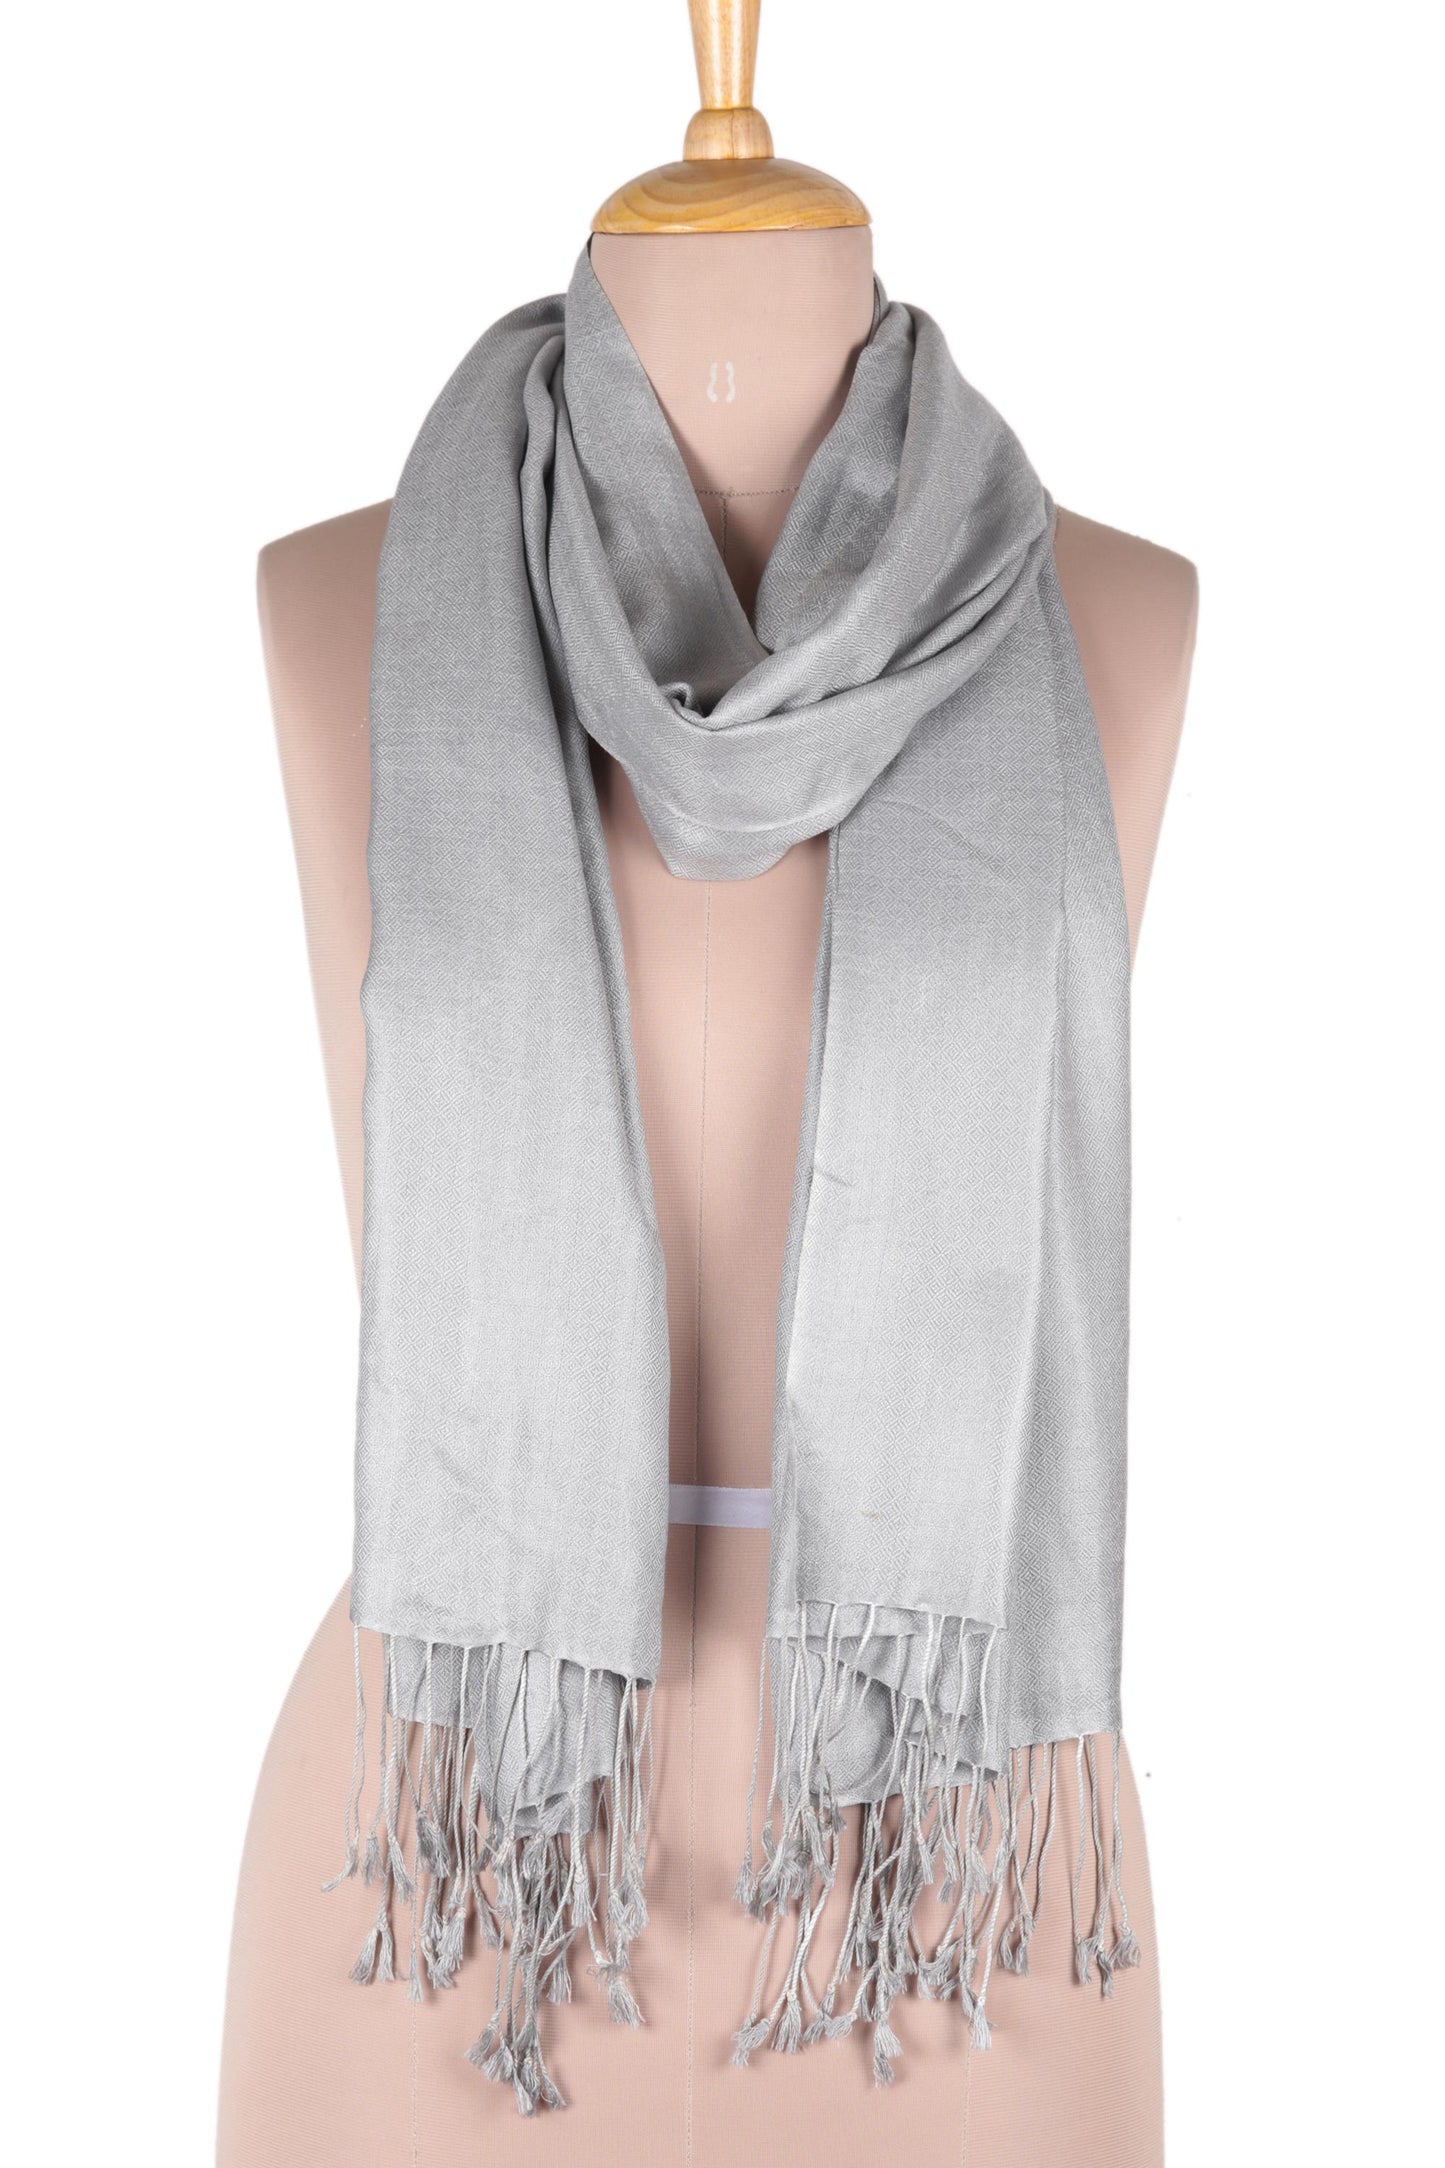 Silver Nights Pure Silk Shawl in Silver Grey from India